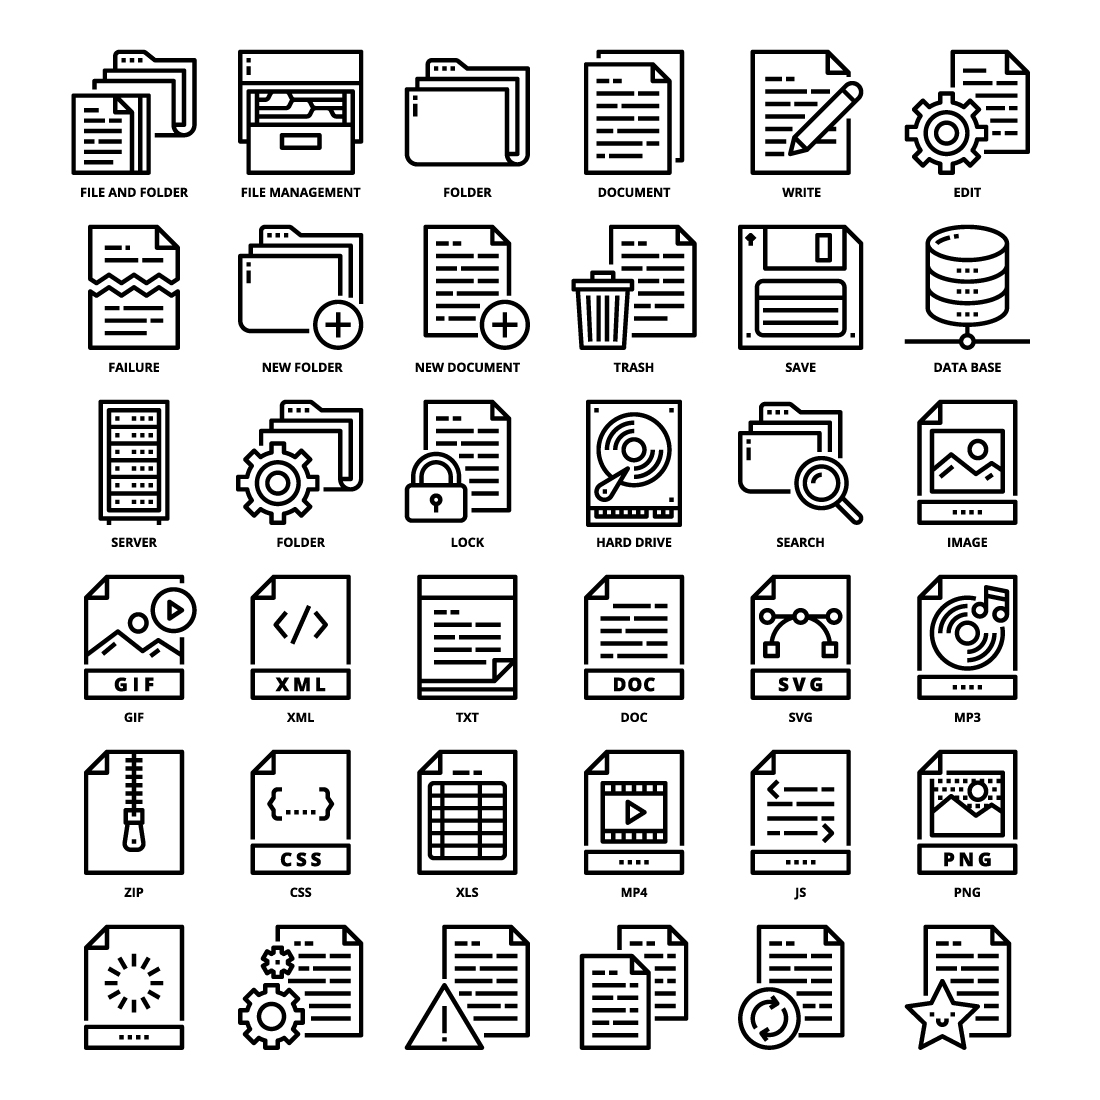 36 File and Folder Icons Set x 4 Styles pinterest preview image.